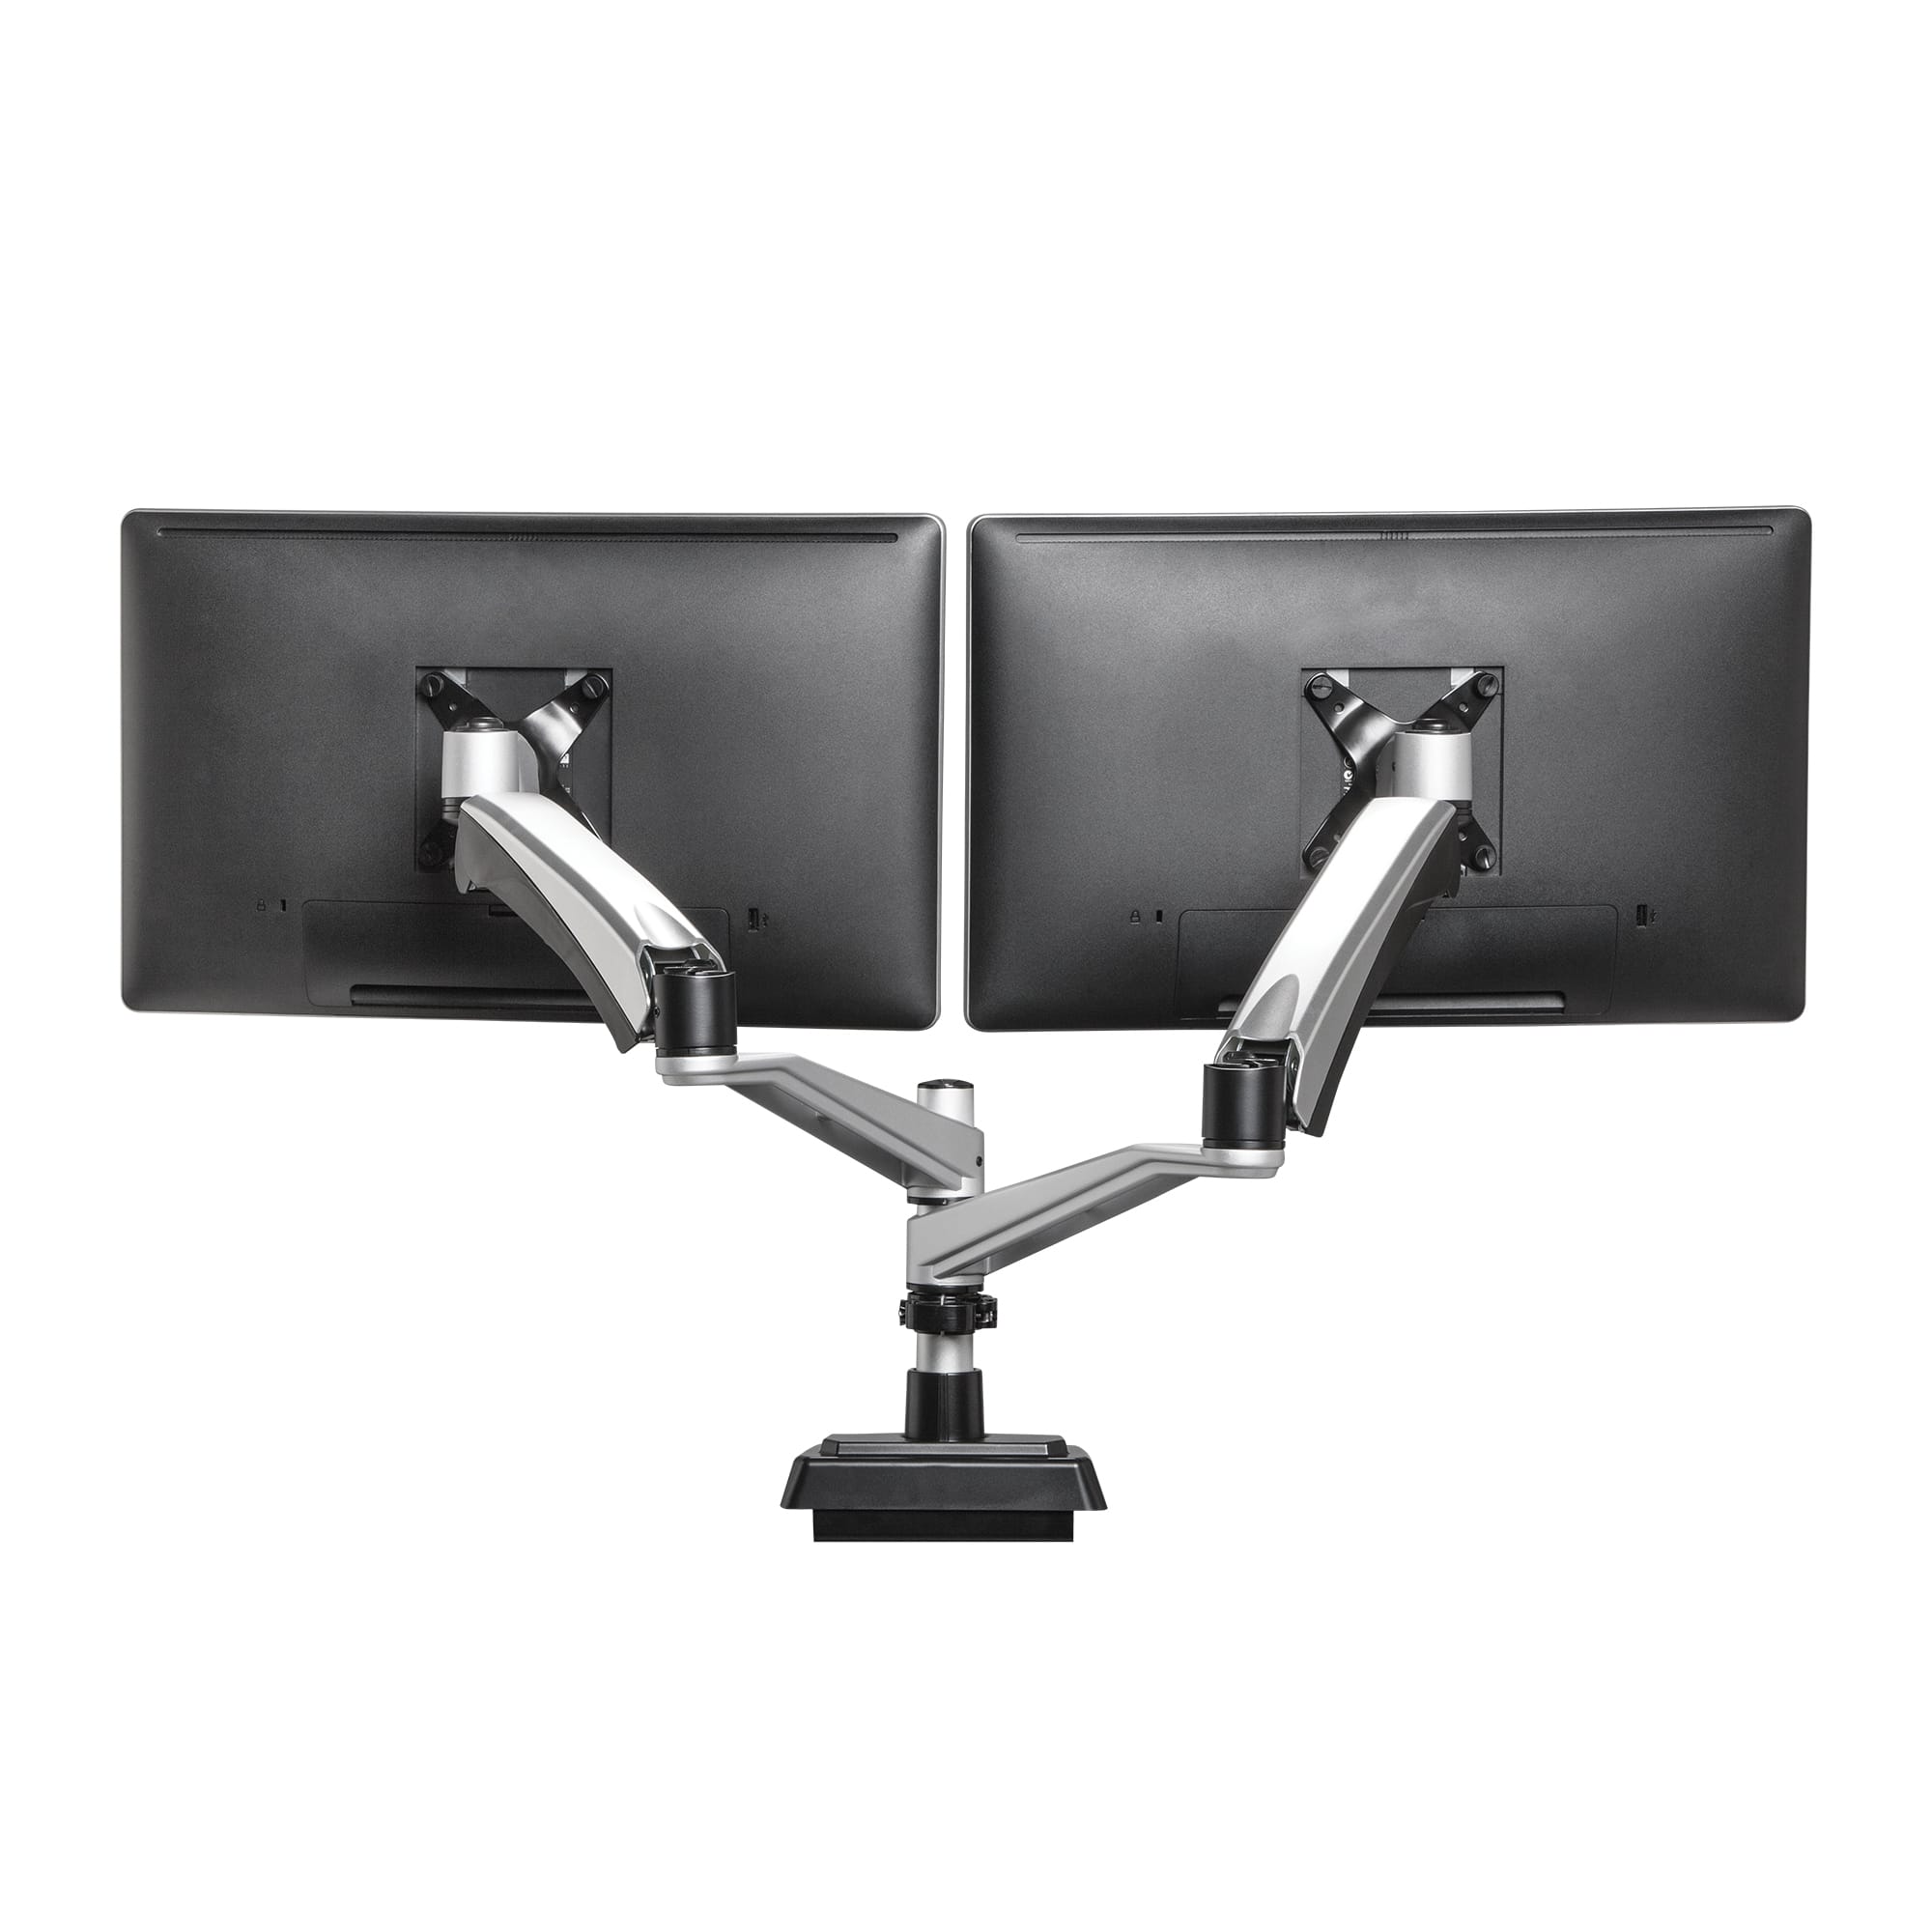 VIVO Single Monitor Desk Mount, Extra Tall Fully Adjustable Stand for LCD Screen up to 32 inches, Ultra Wide Screens up to 38 inches, 22 lbs Capacit - 3